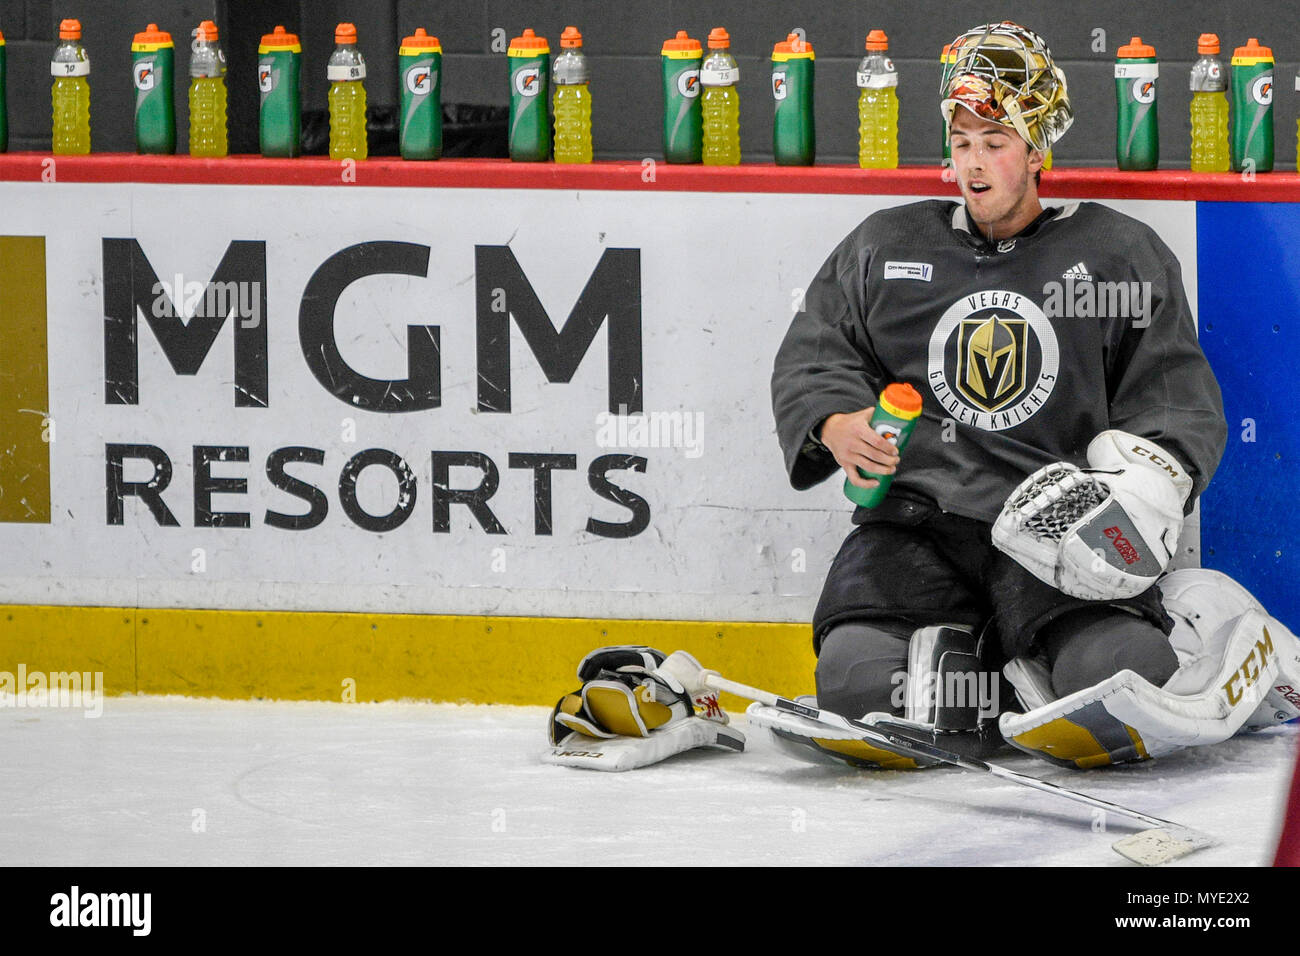 Marc andre fleury hi-res stock photography and images - Alamy 